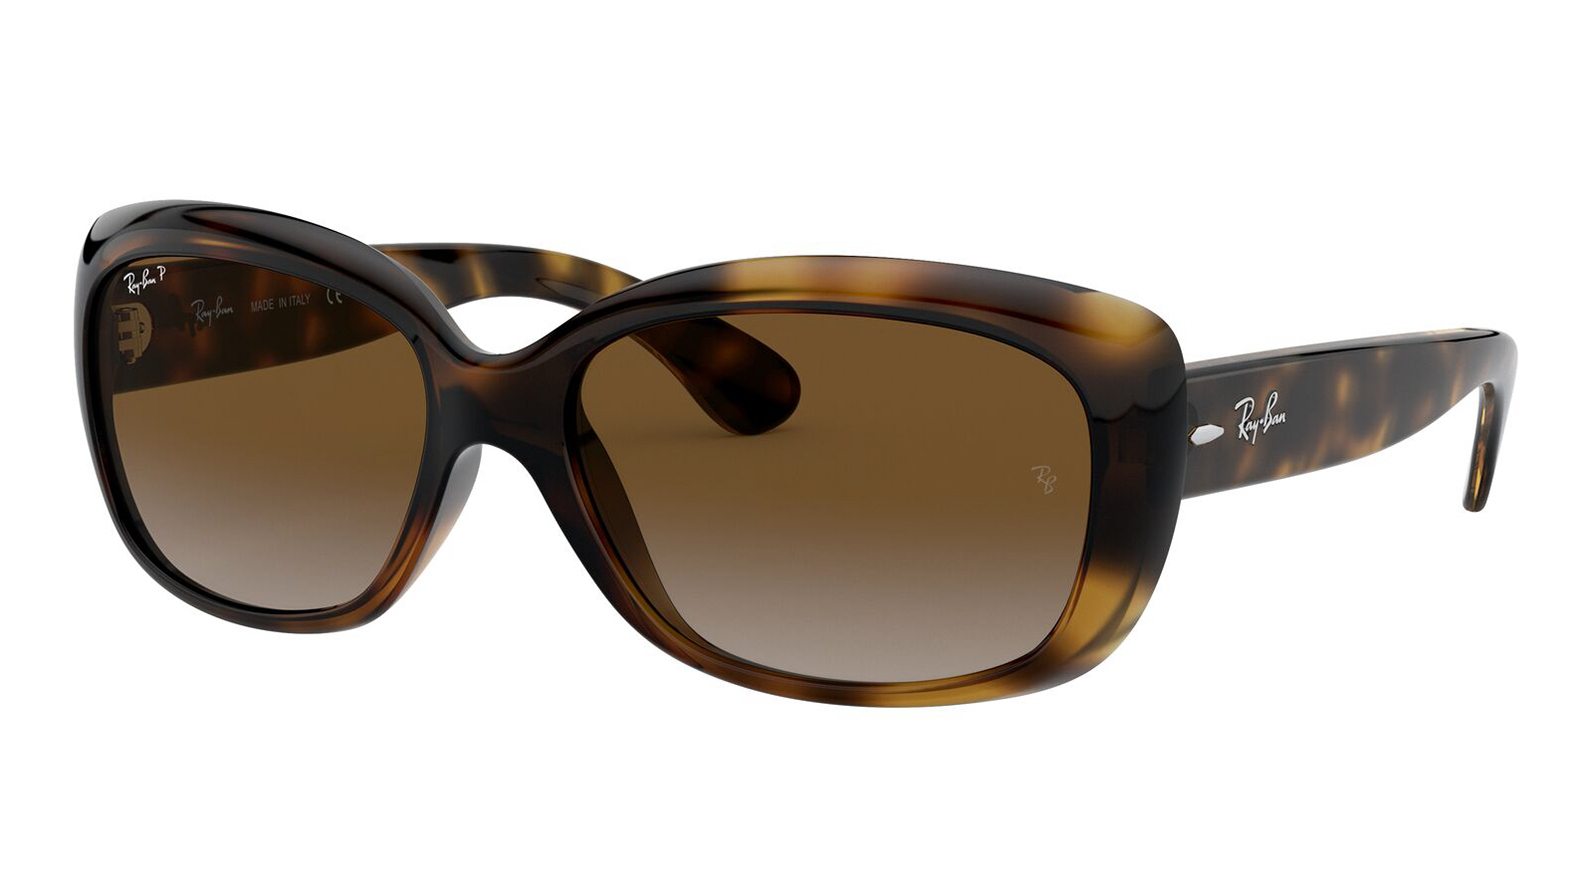 Ray-Ban Jackie Ohh RB 4101 710/T5